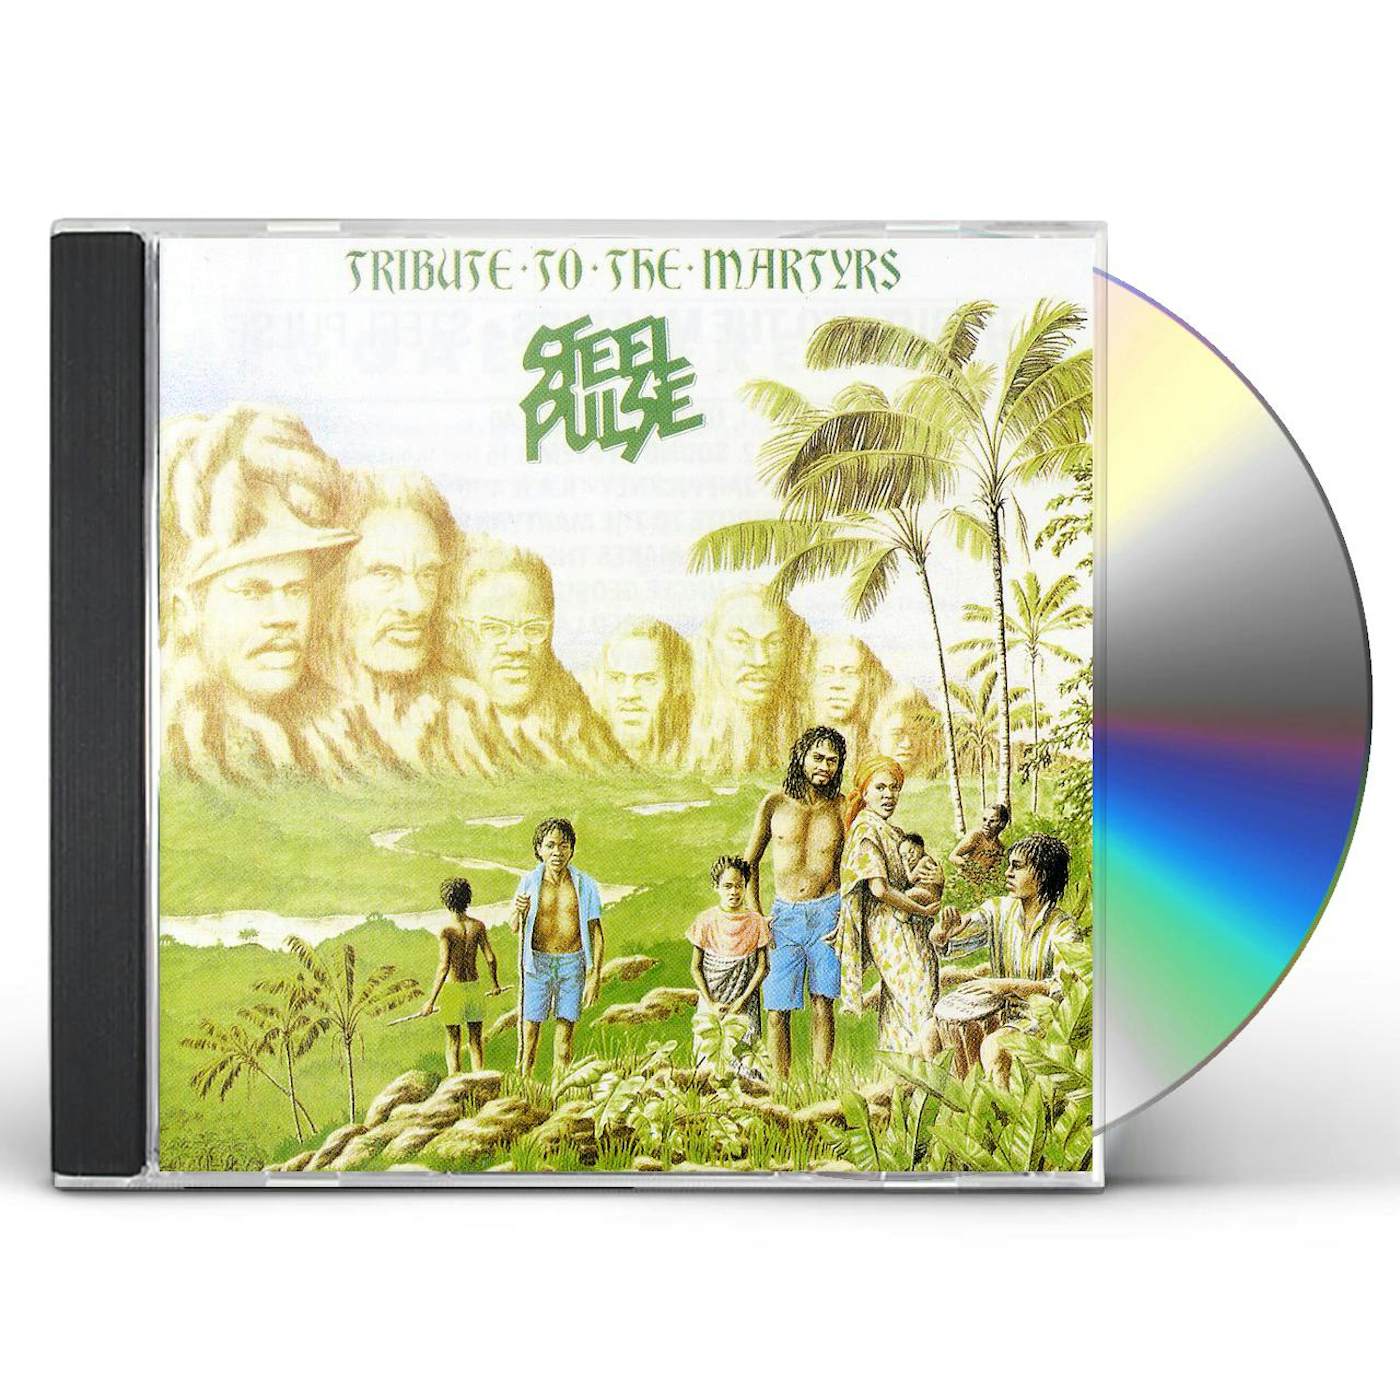 Steel Pulse TRIBUTE TO THE MARTYRS CD